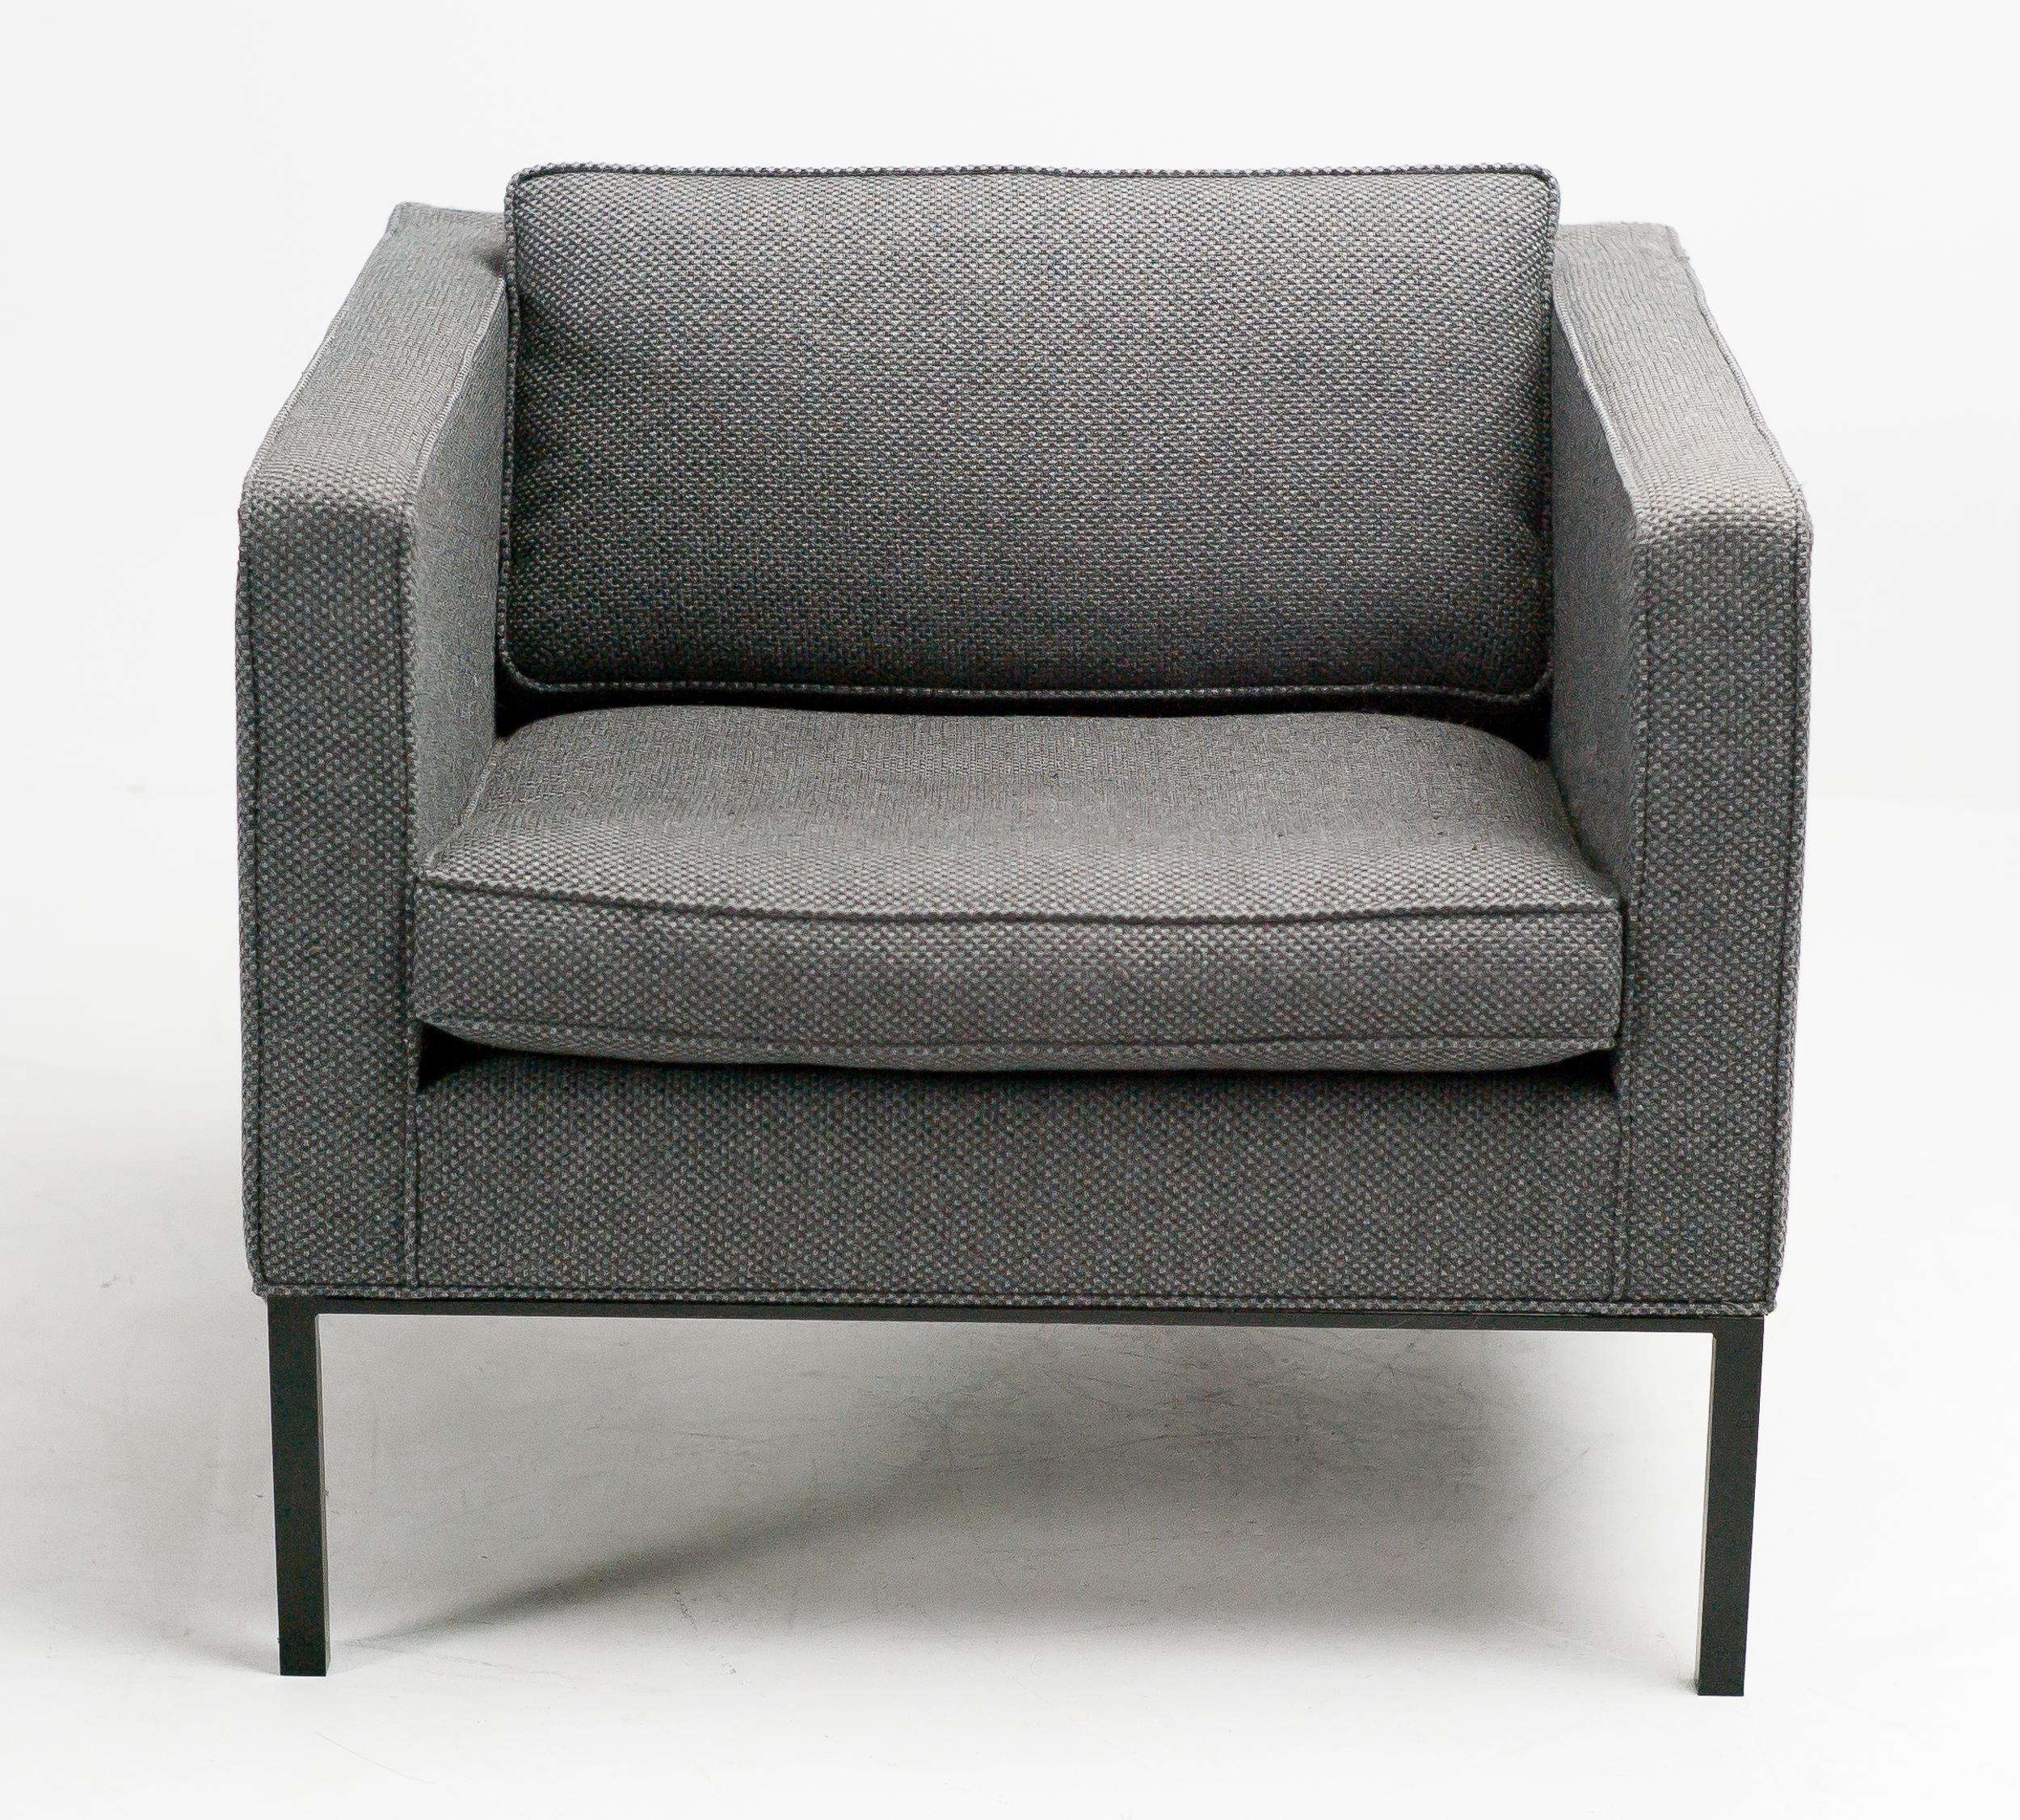 Artifort 905 lounge chair by the Artifort design team lead by Kho Lian Ie, 1964.
Upholstered in a two-tone, dark grey/black, woolen fabric De Ploeg.
This chair was used in a boardroom of a bank.
Marked at the bottom.

Artifort is a renowned Dutch